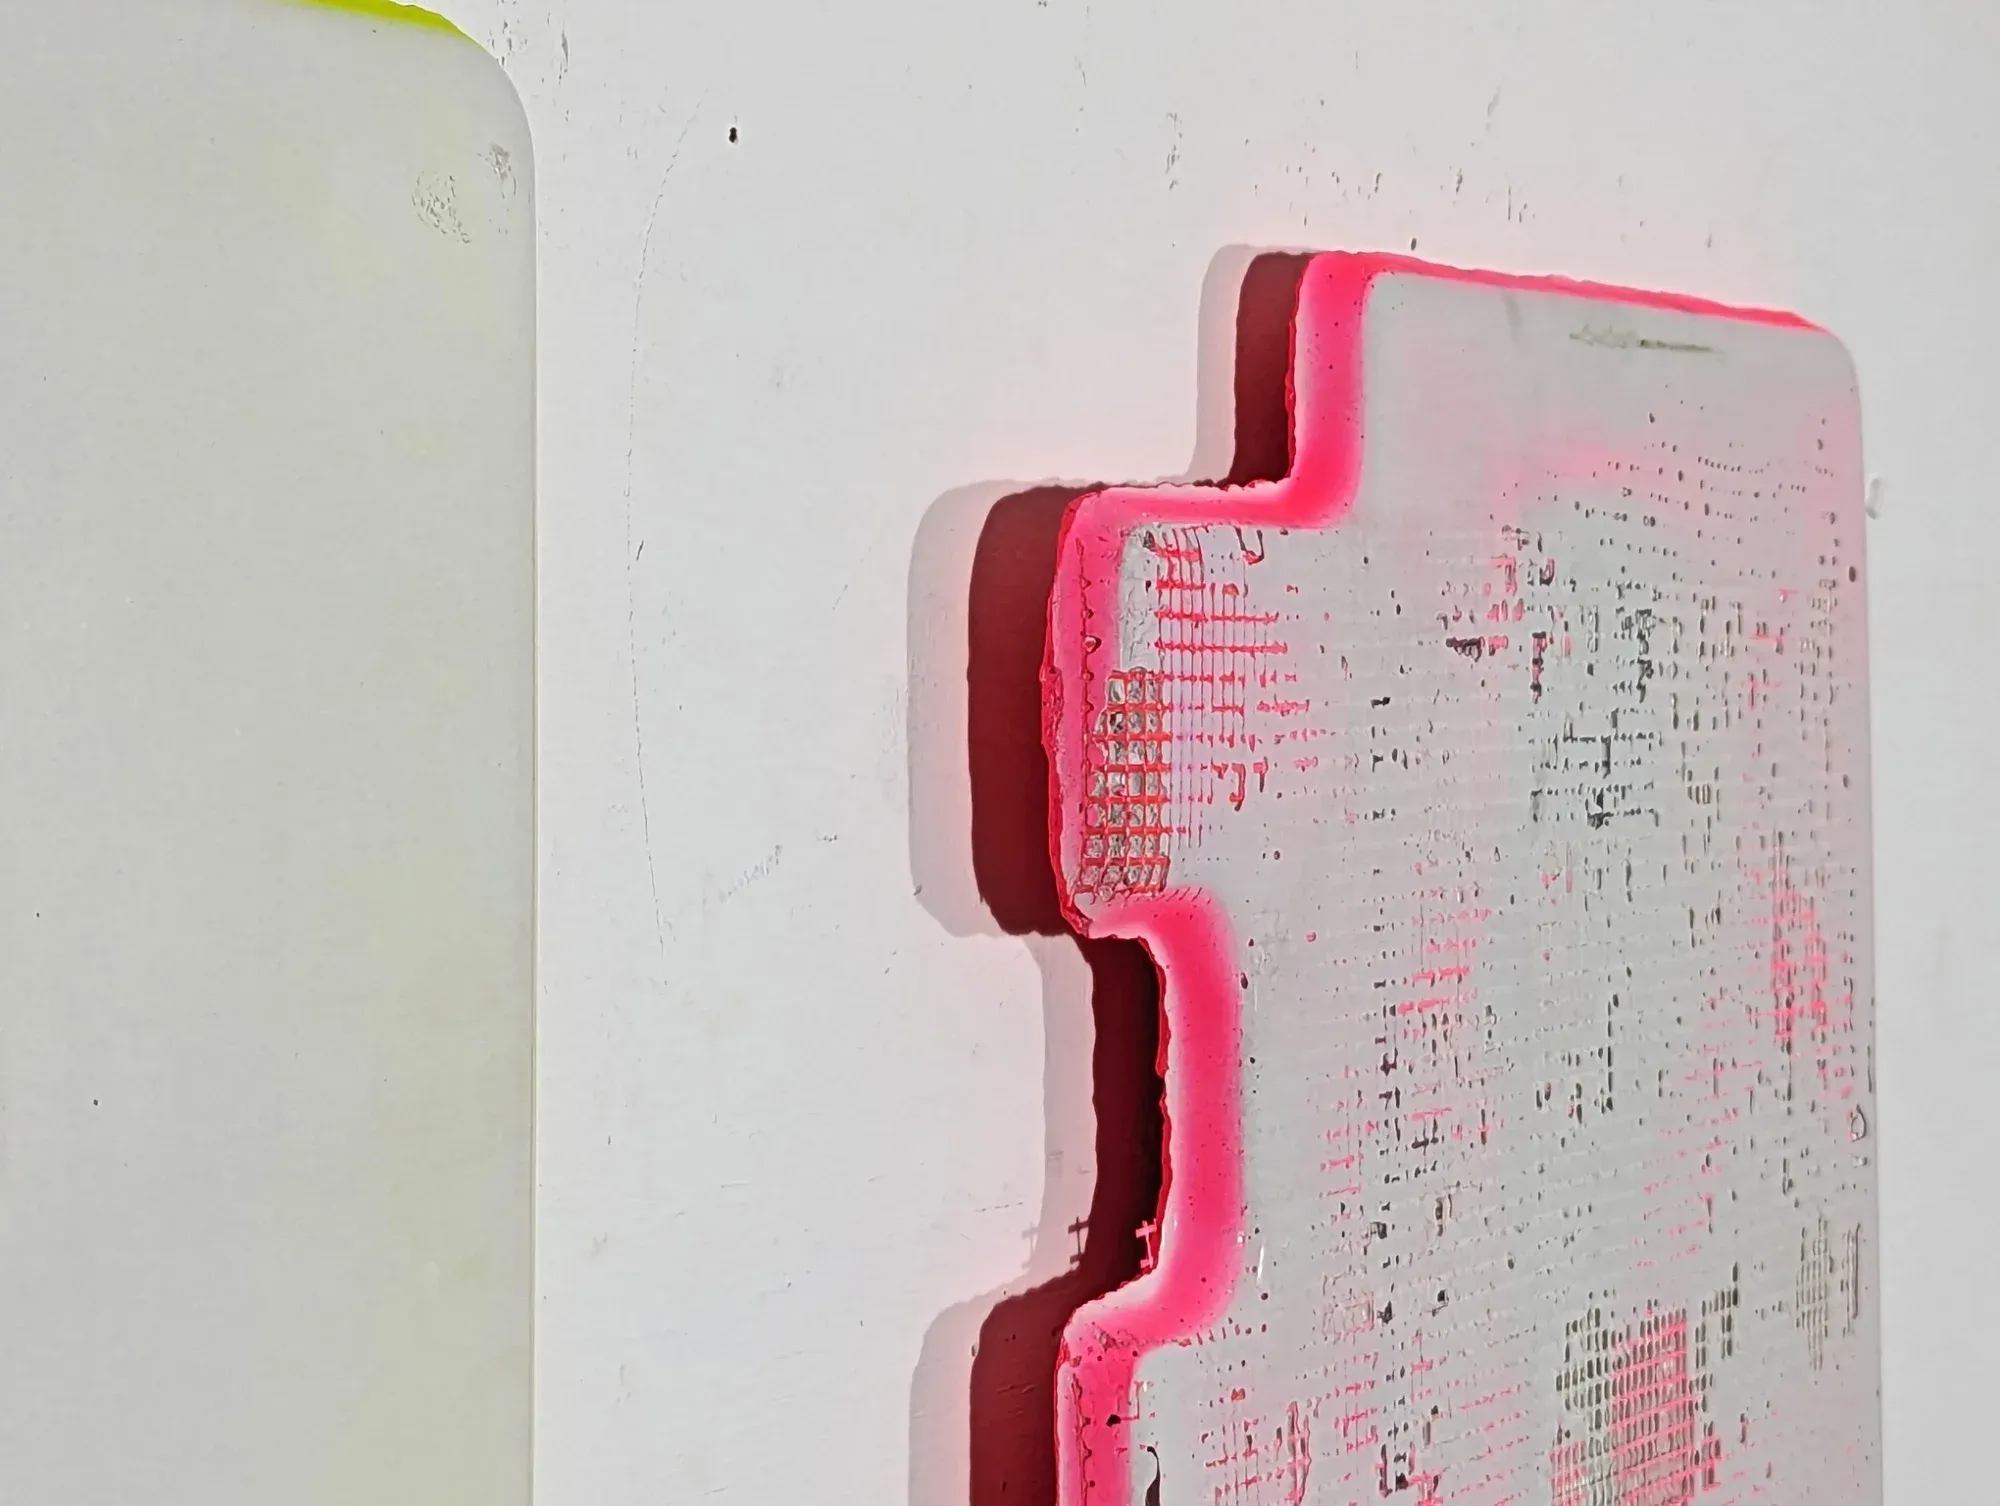 new sculptor in contemporary art, material work with neon color, Wallpiece 